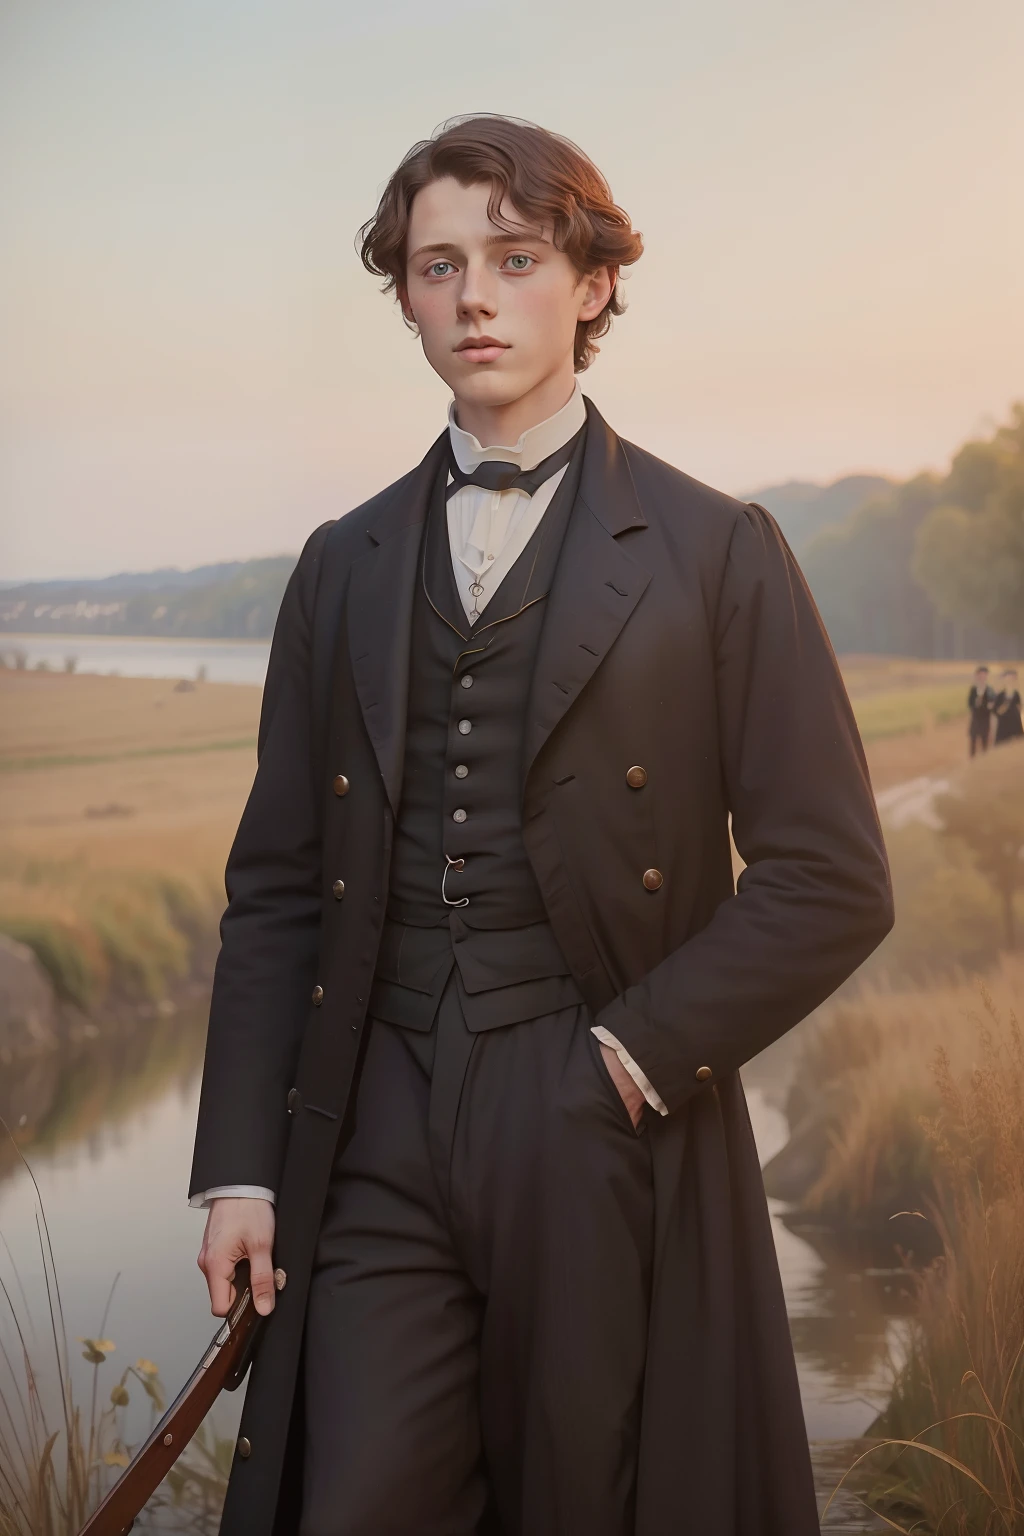 year: 18. Location: Rock Island, Illinois. Pre-Raphaelite scene with a 21-year-old George MacKay, in a funeral, outdoors, ((((Clothing from the 1860s)))) ((Hairstyle of the 1860s)), ((("OMITB" colorful cinematography)))